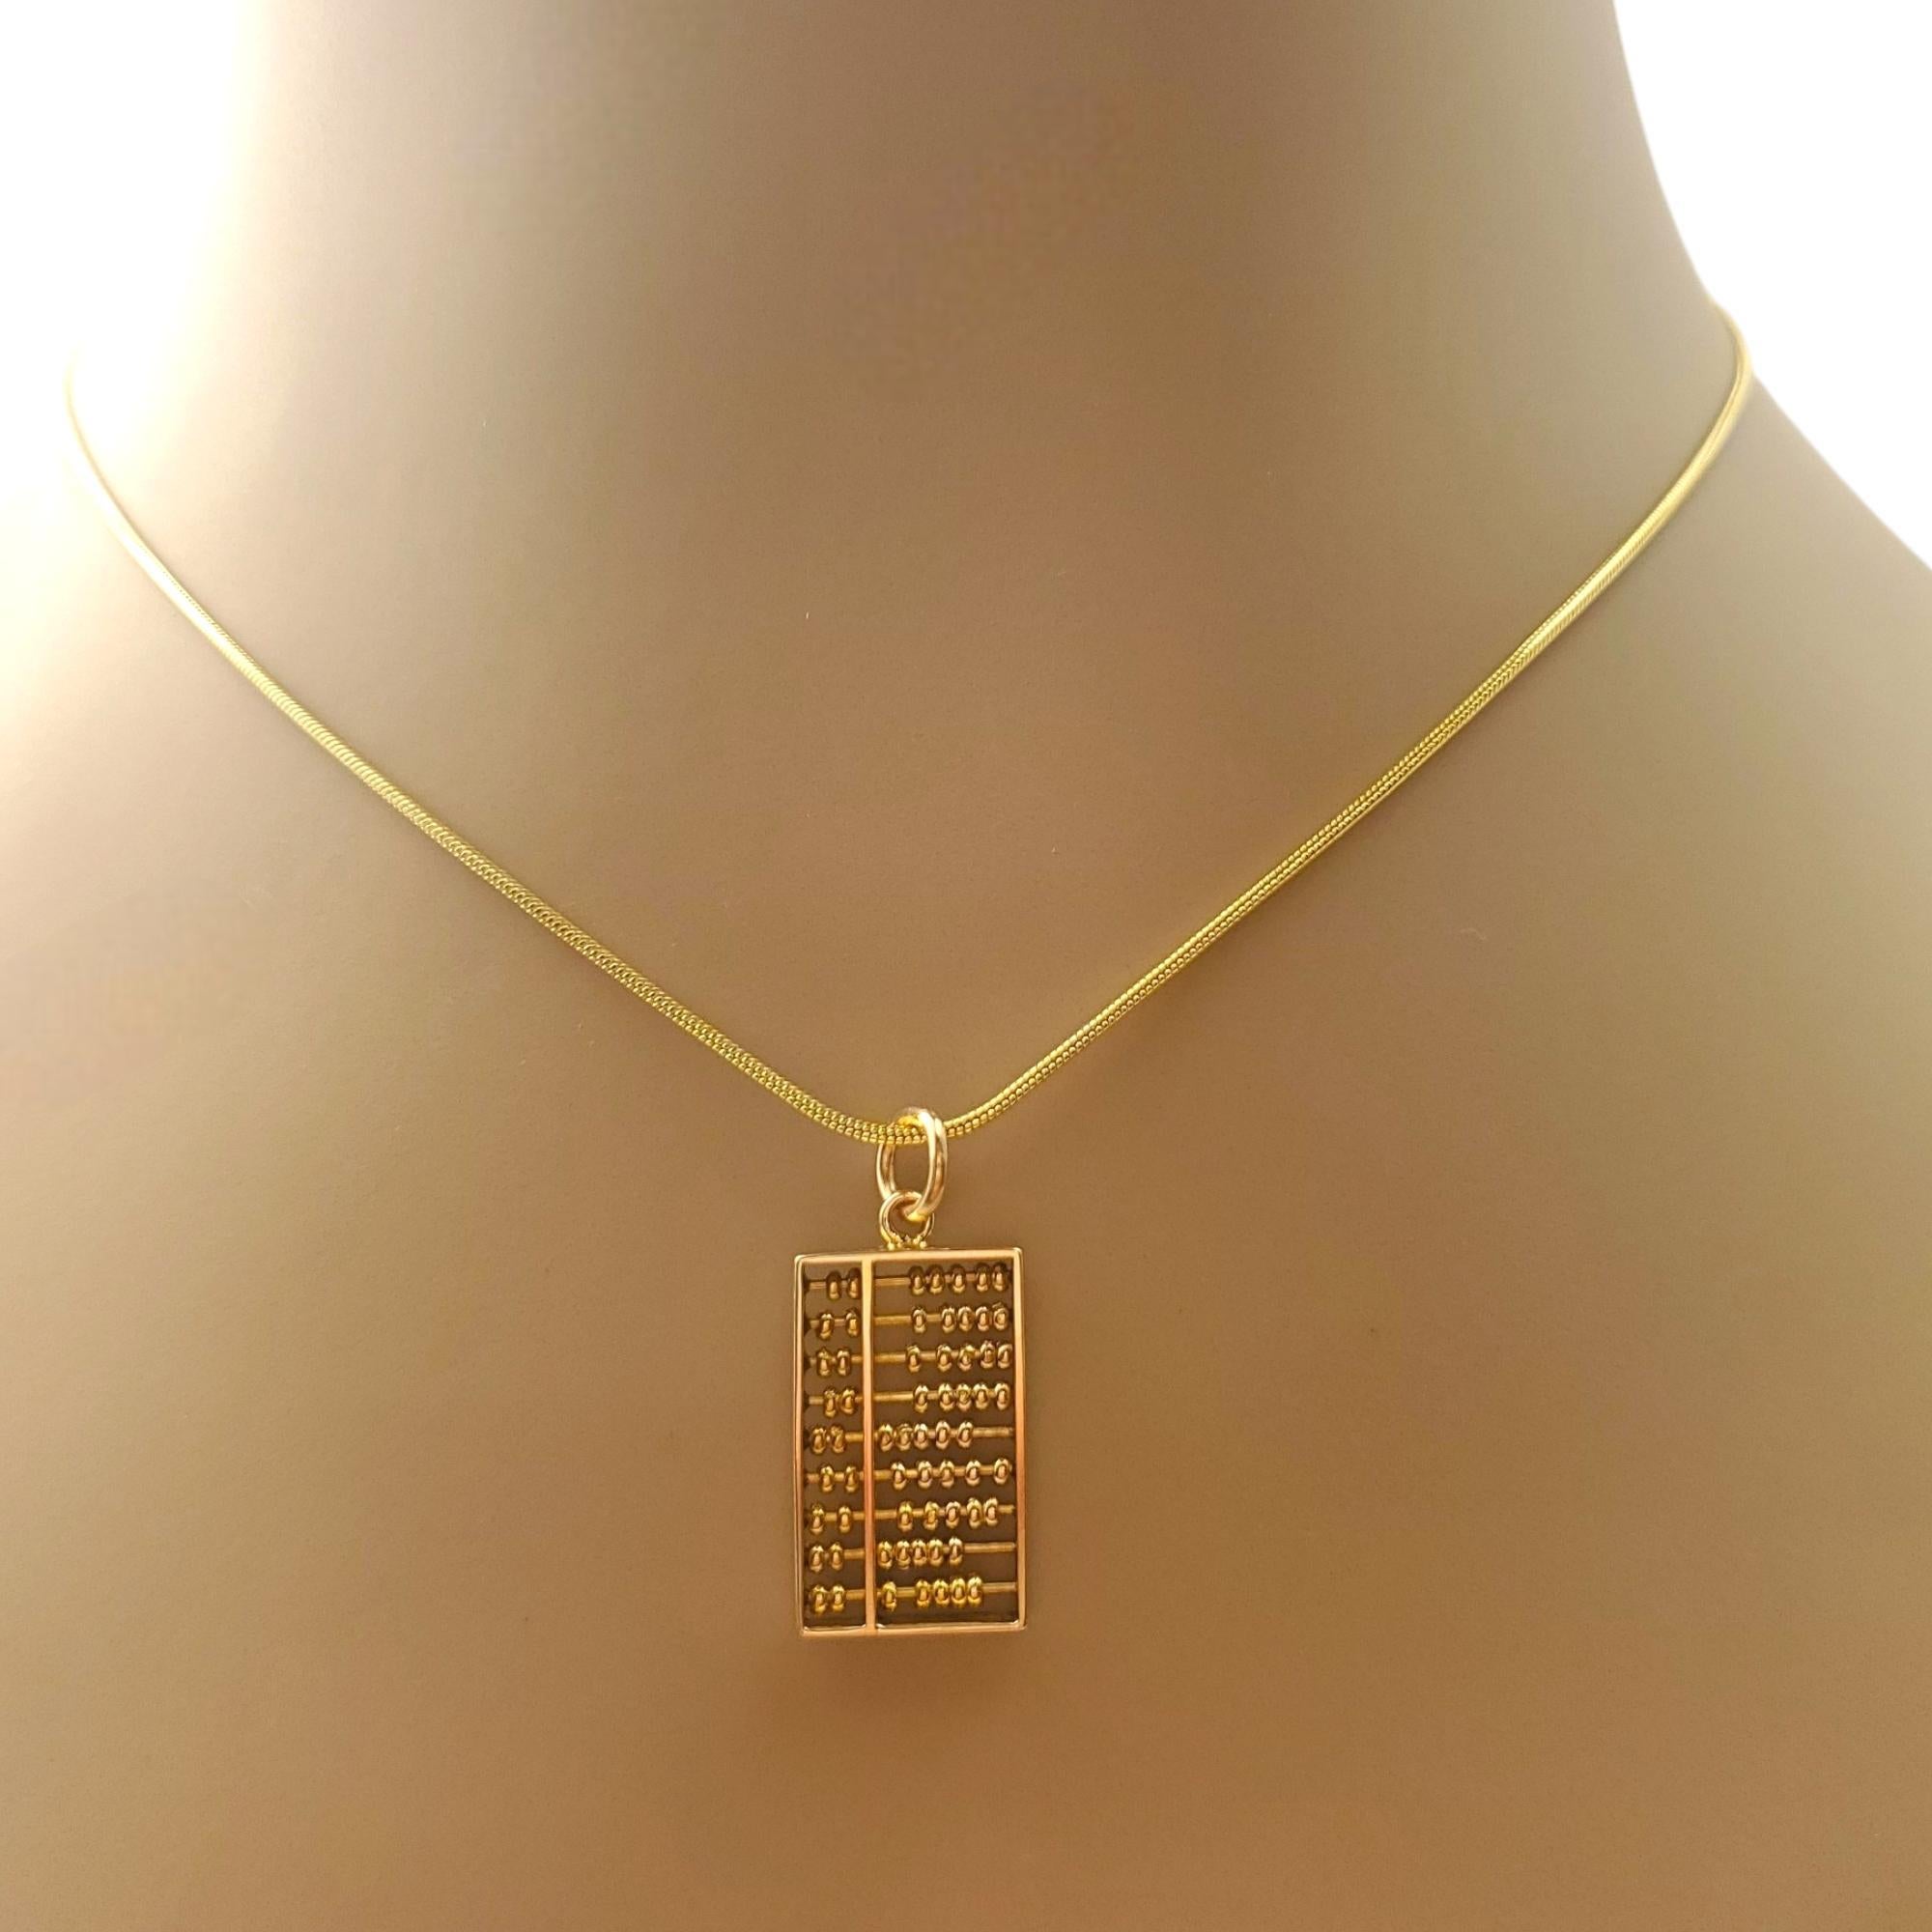 14K Yellow Gold Abacus Charm with Sliding Beads #16599 For Sale 2